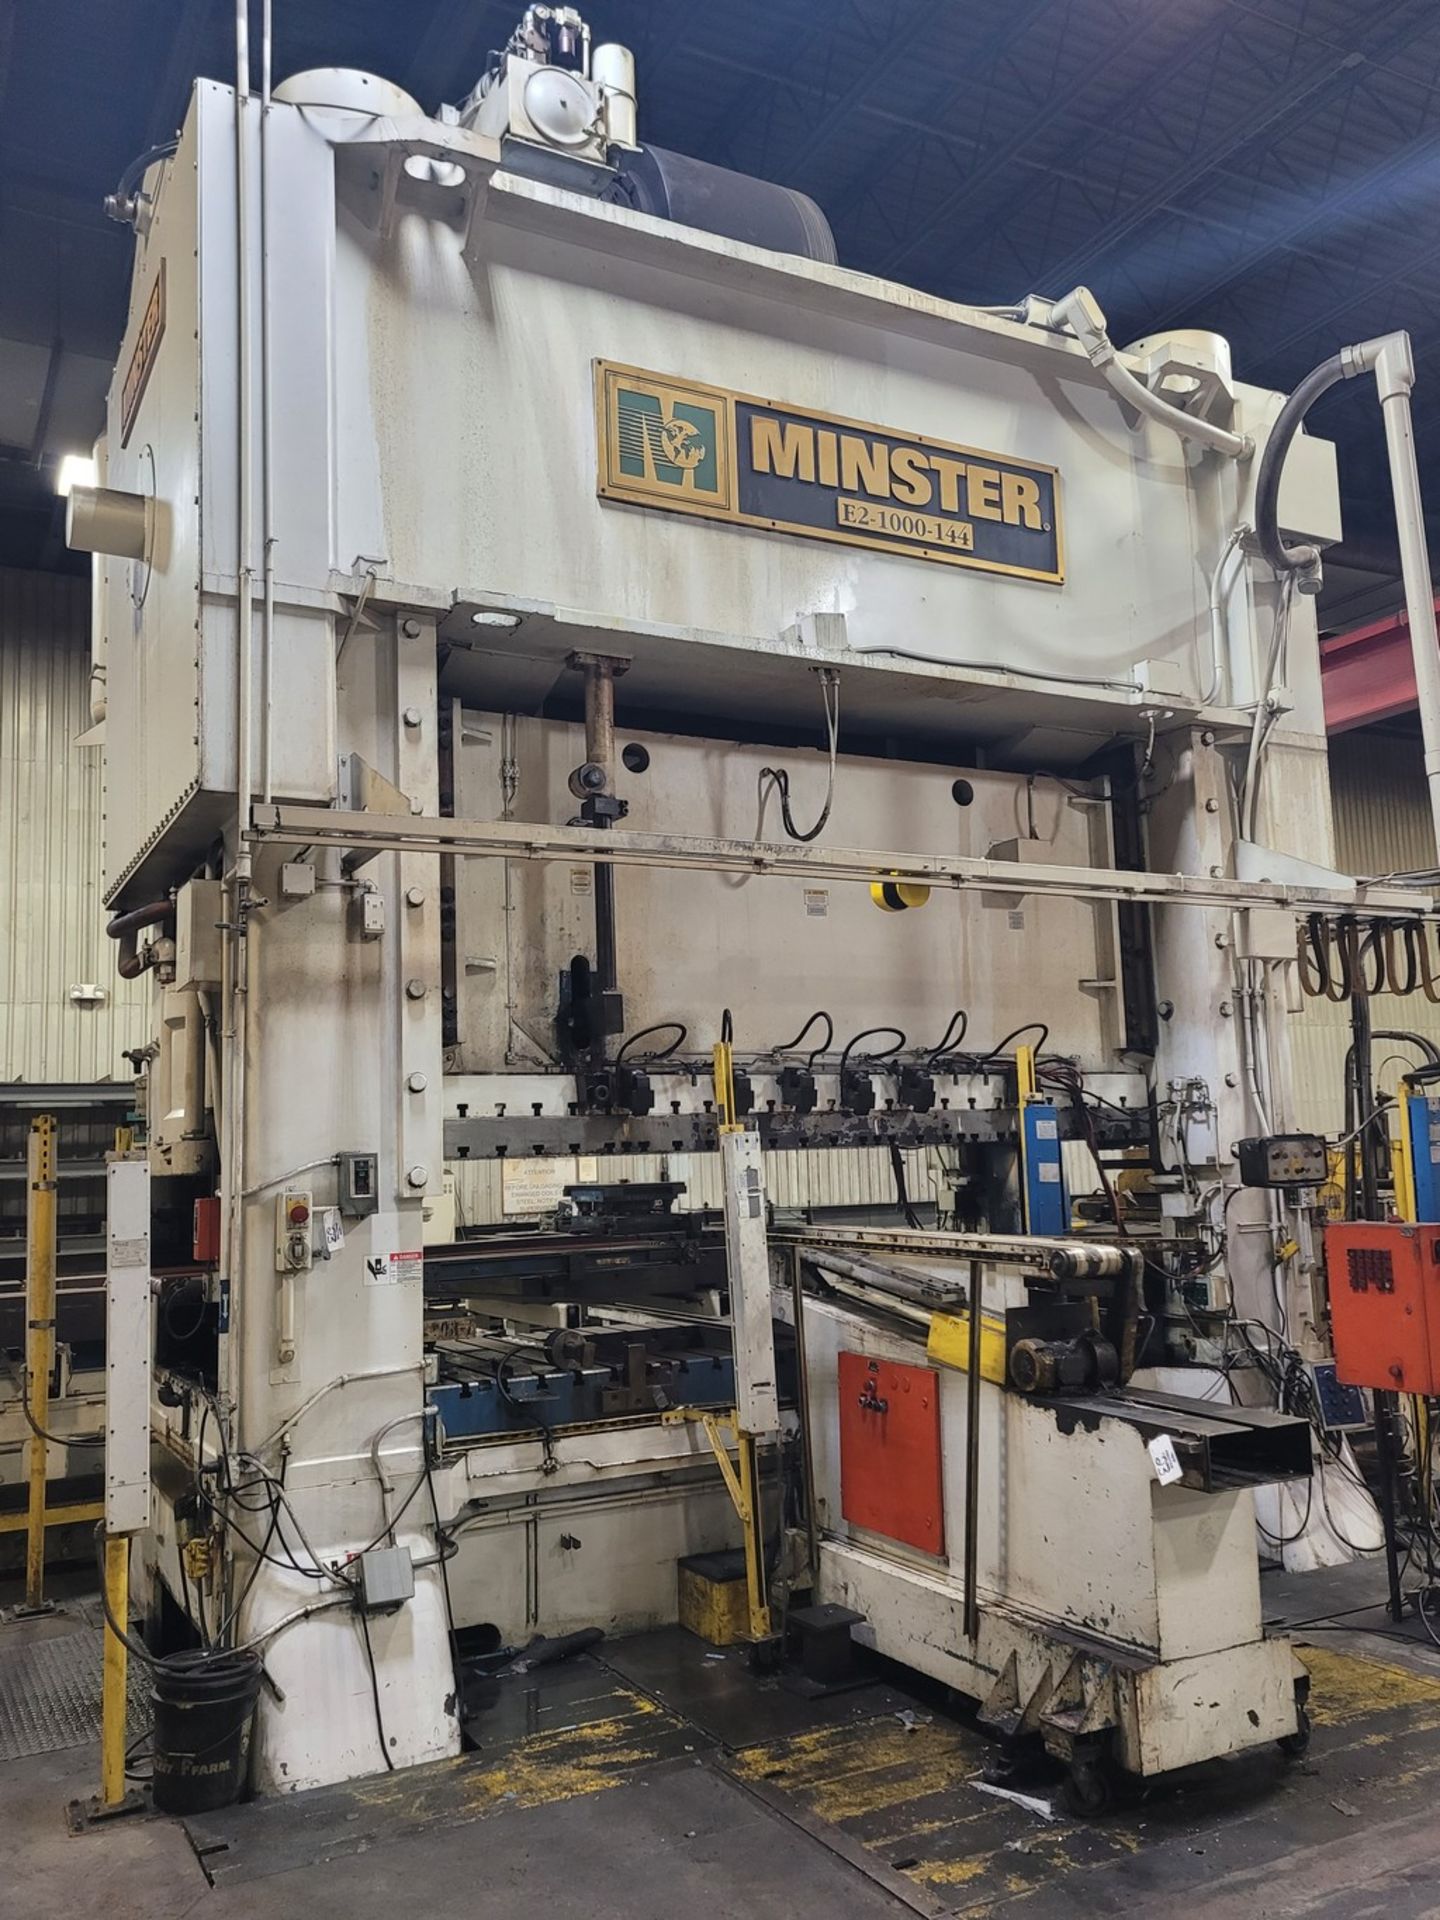 2000 Minster E2-1000-144 1000-Ton Straight Side Press with Minster Bolster Transfer System - Image 2 of 20